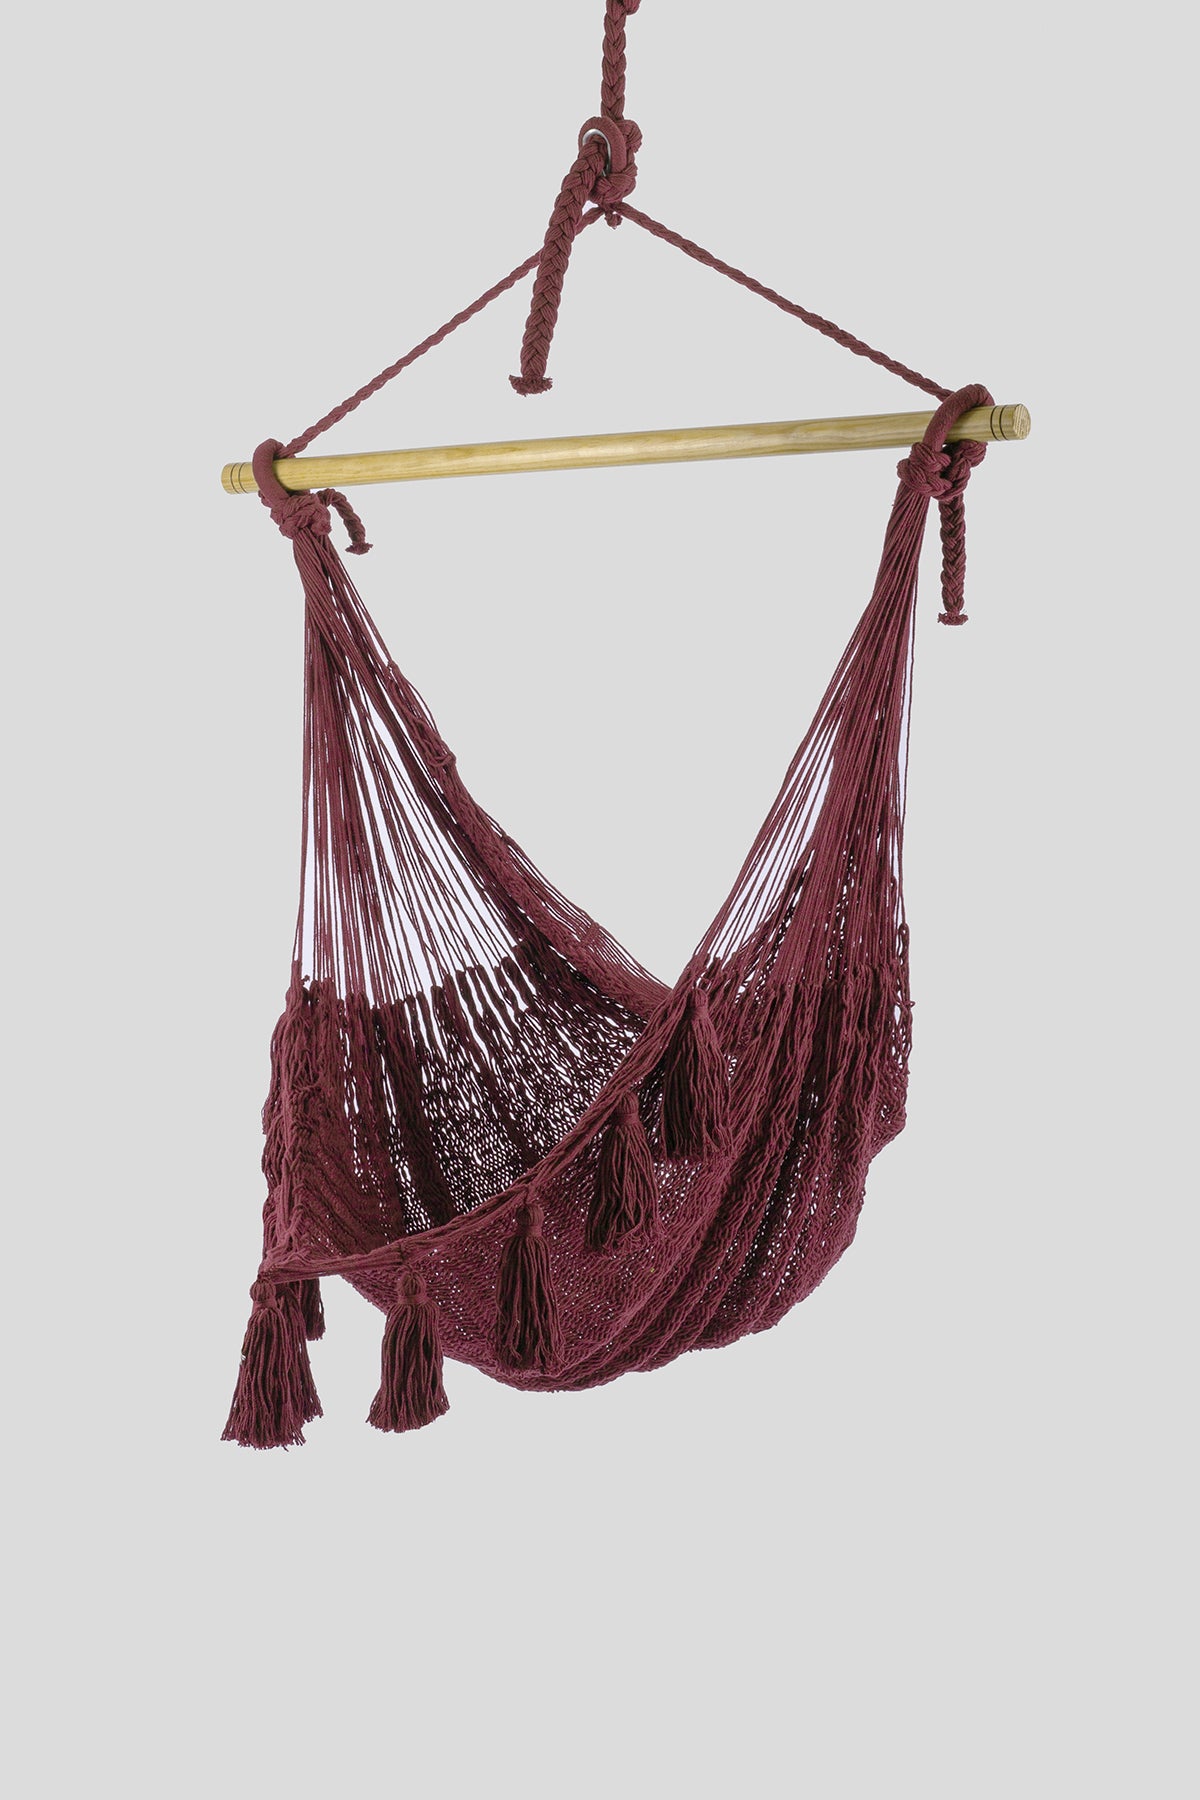 Marron Cotton Mexican Hammock swing from Mexico, "Marron Swing Chair"